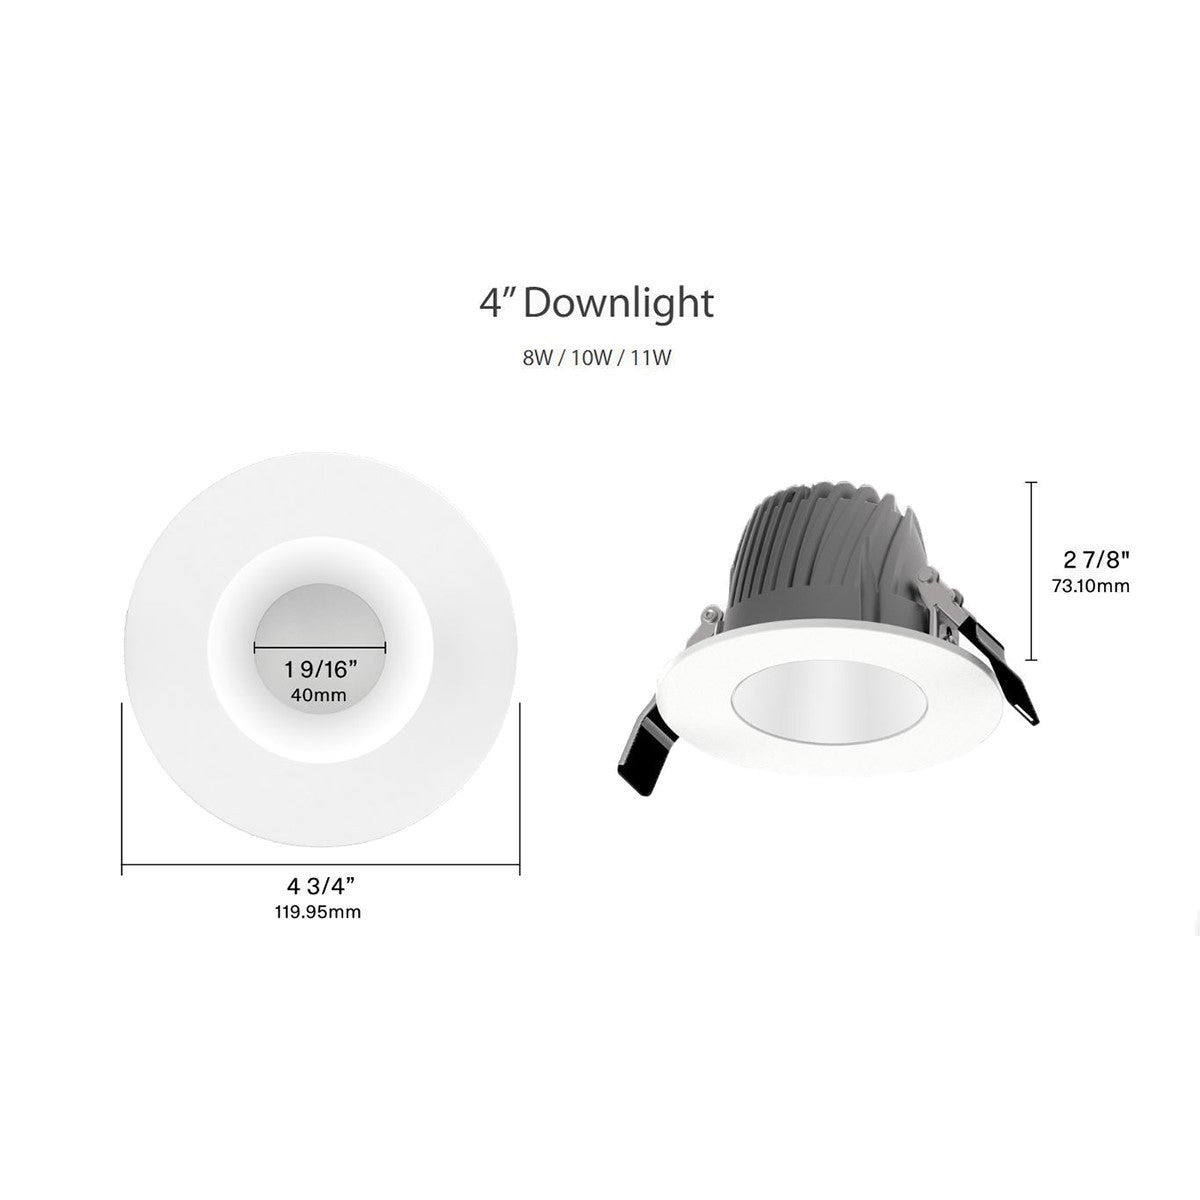 4 Inch LED Deep Regress Commercial Downlight, Field Adjustable 8/10/11W, 650/750/850 Lumens, 30/35/40/50K, Smooth Trim, White Finish